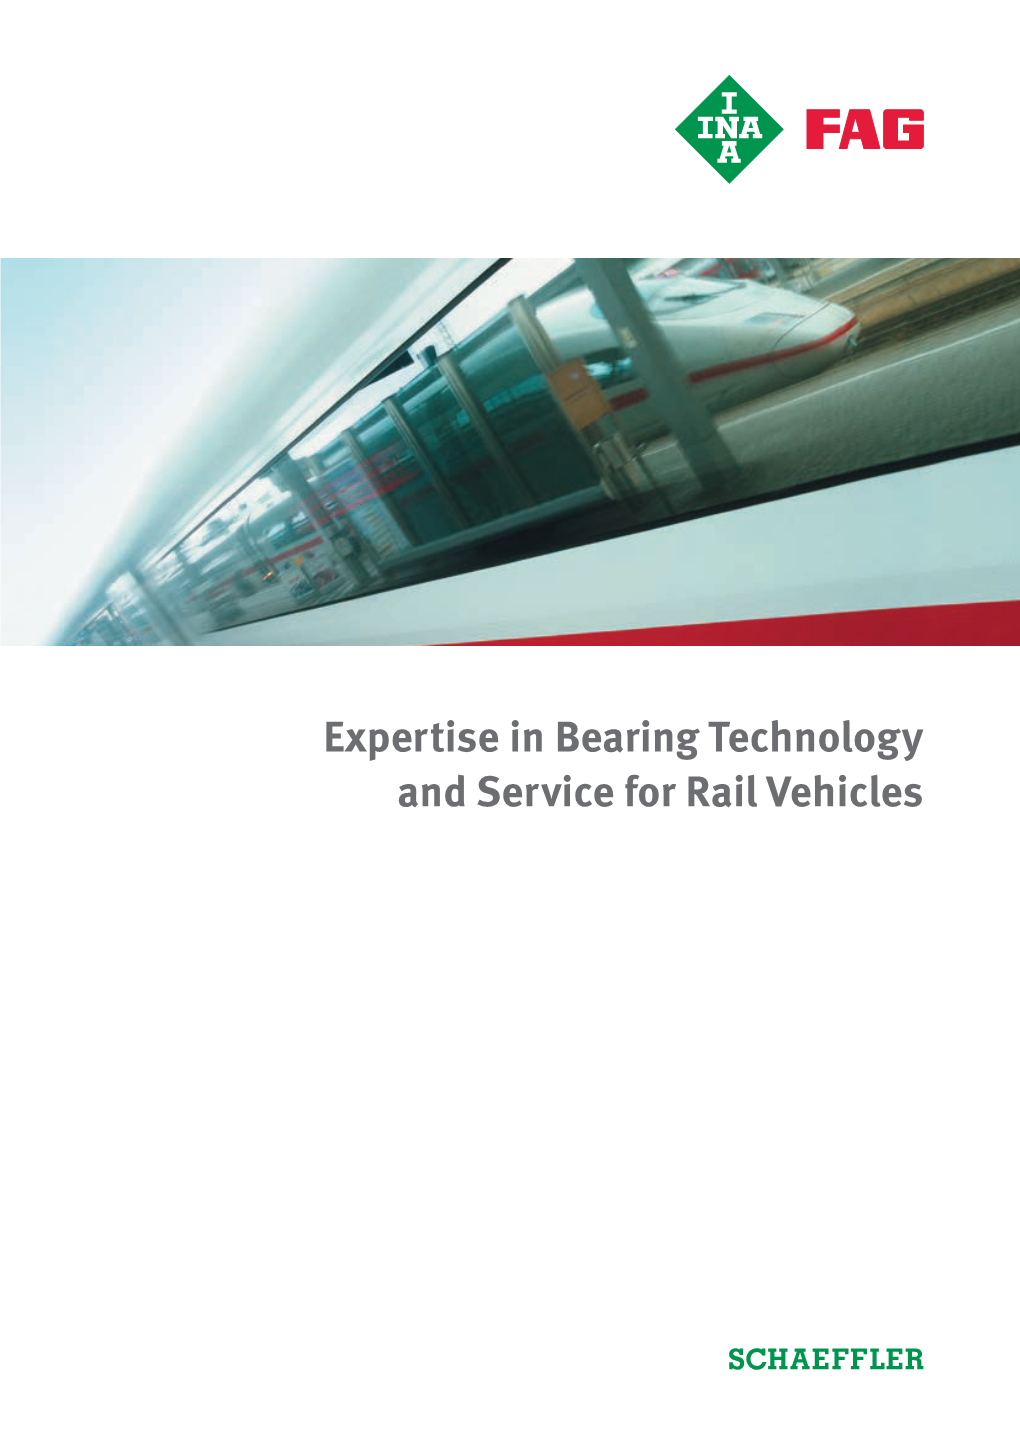 Expertise in Bearing Technology and Service for Rail Vehicles Together We Move the World …